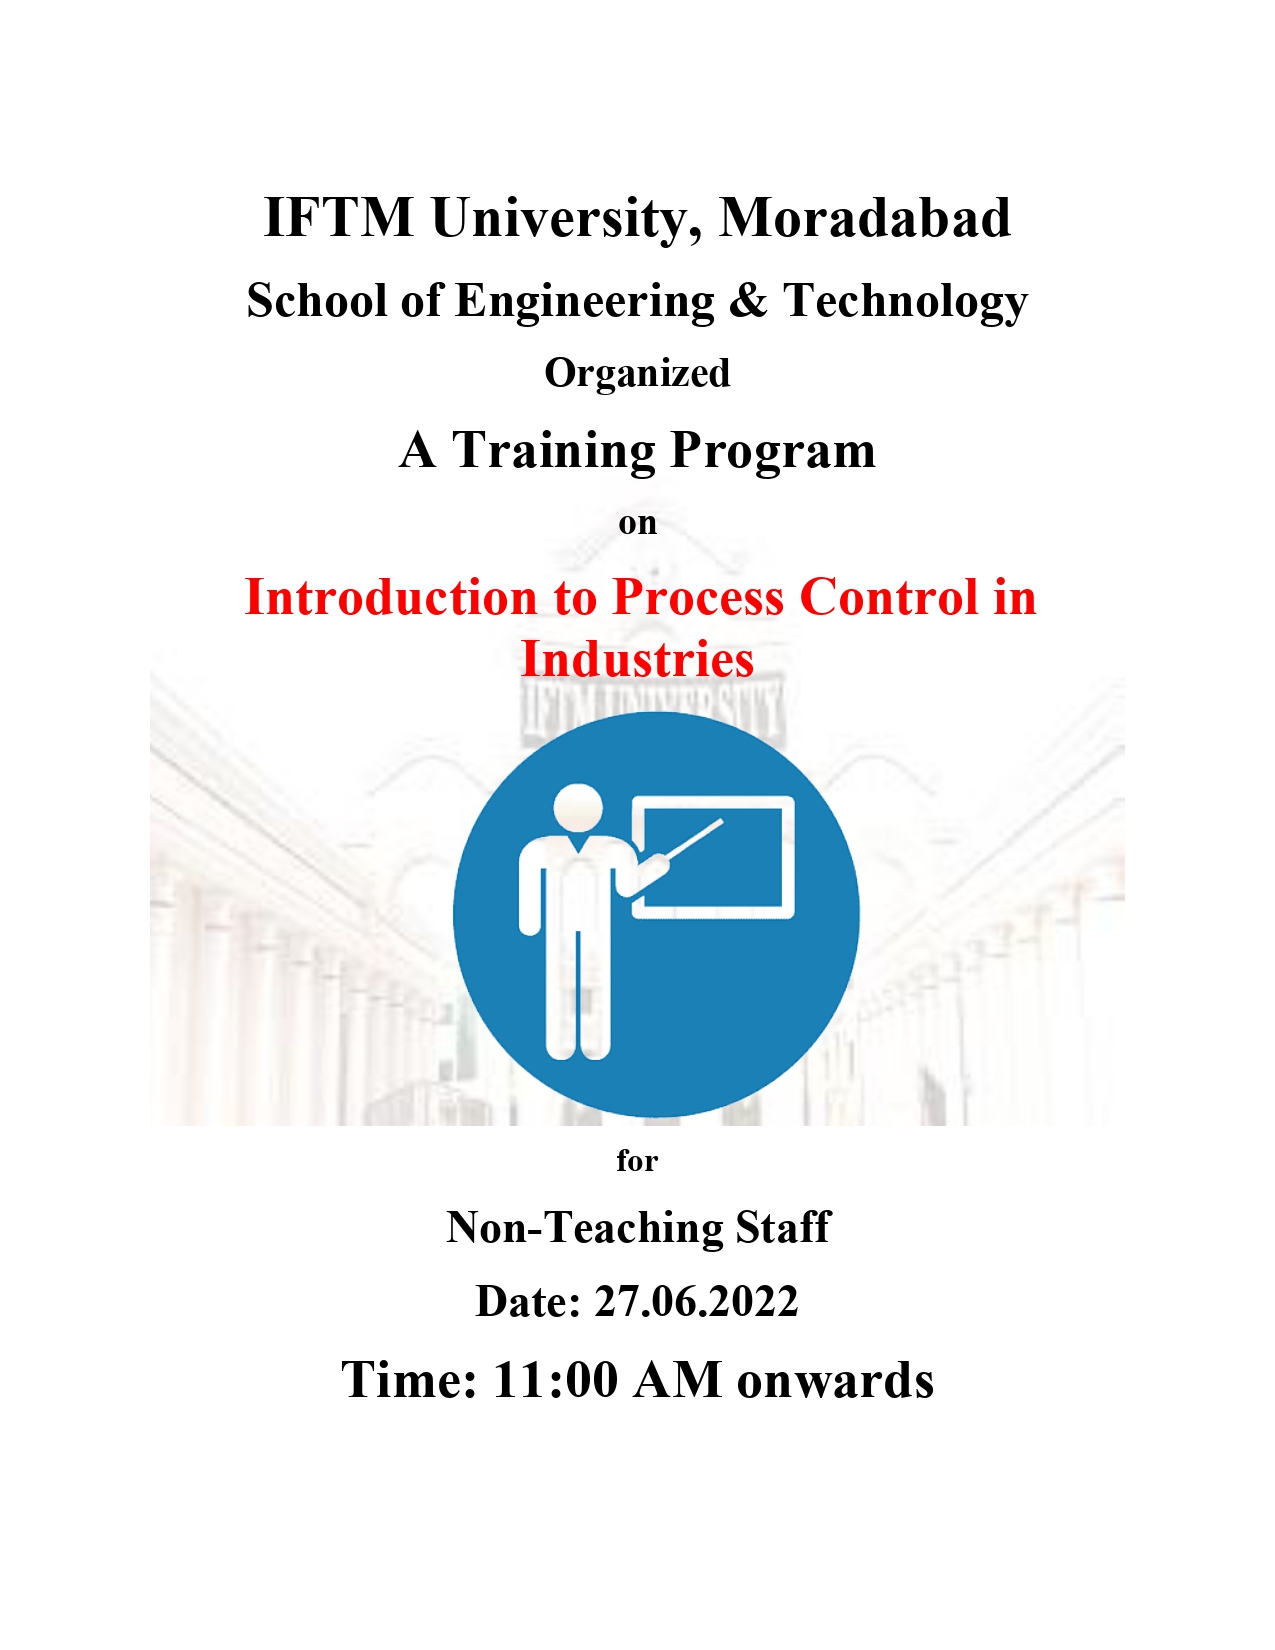 Training Programme on Introduction to Process Control in Industries for nonteaching staff